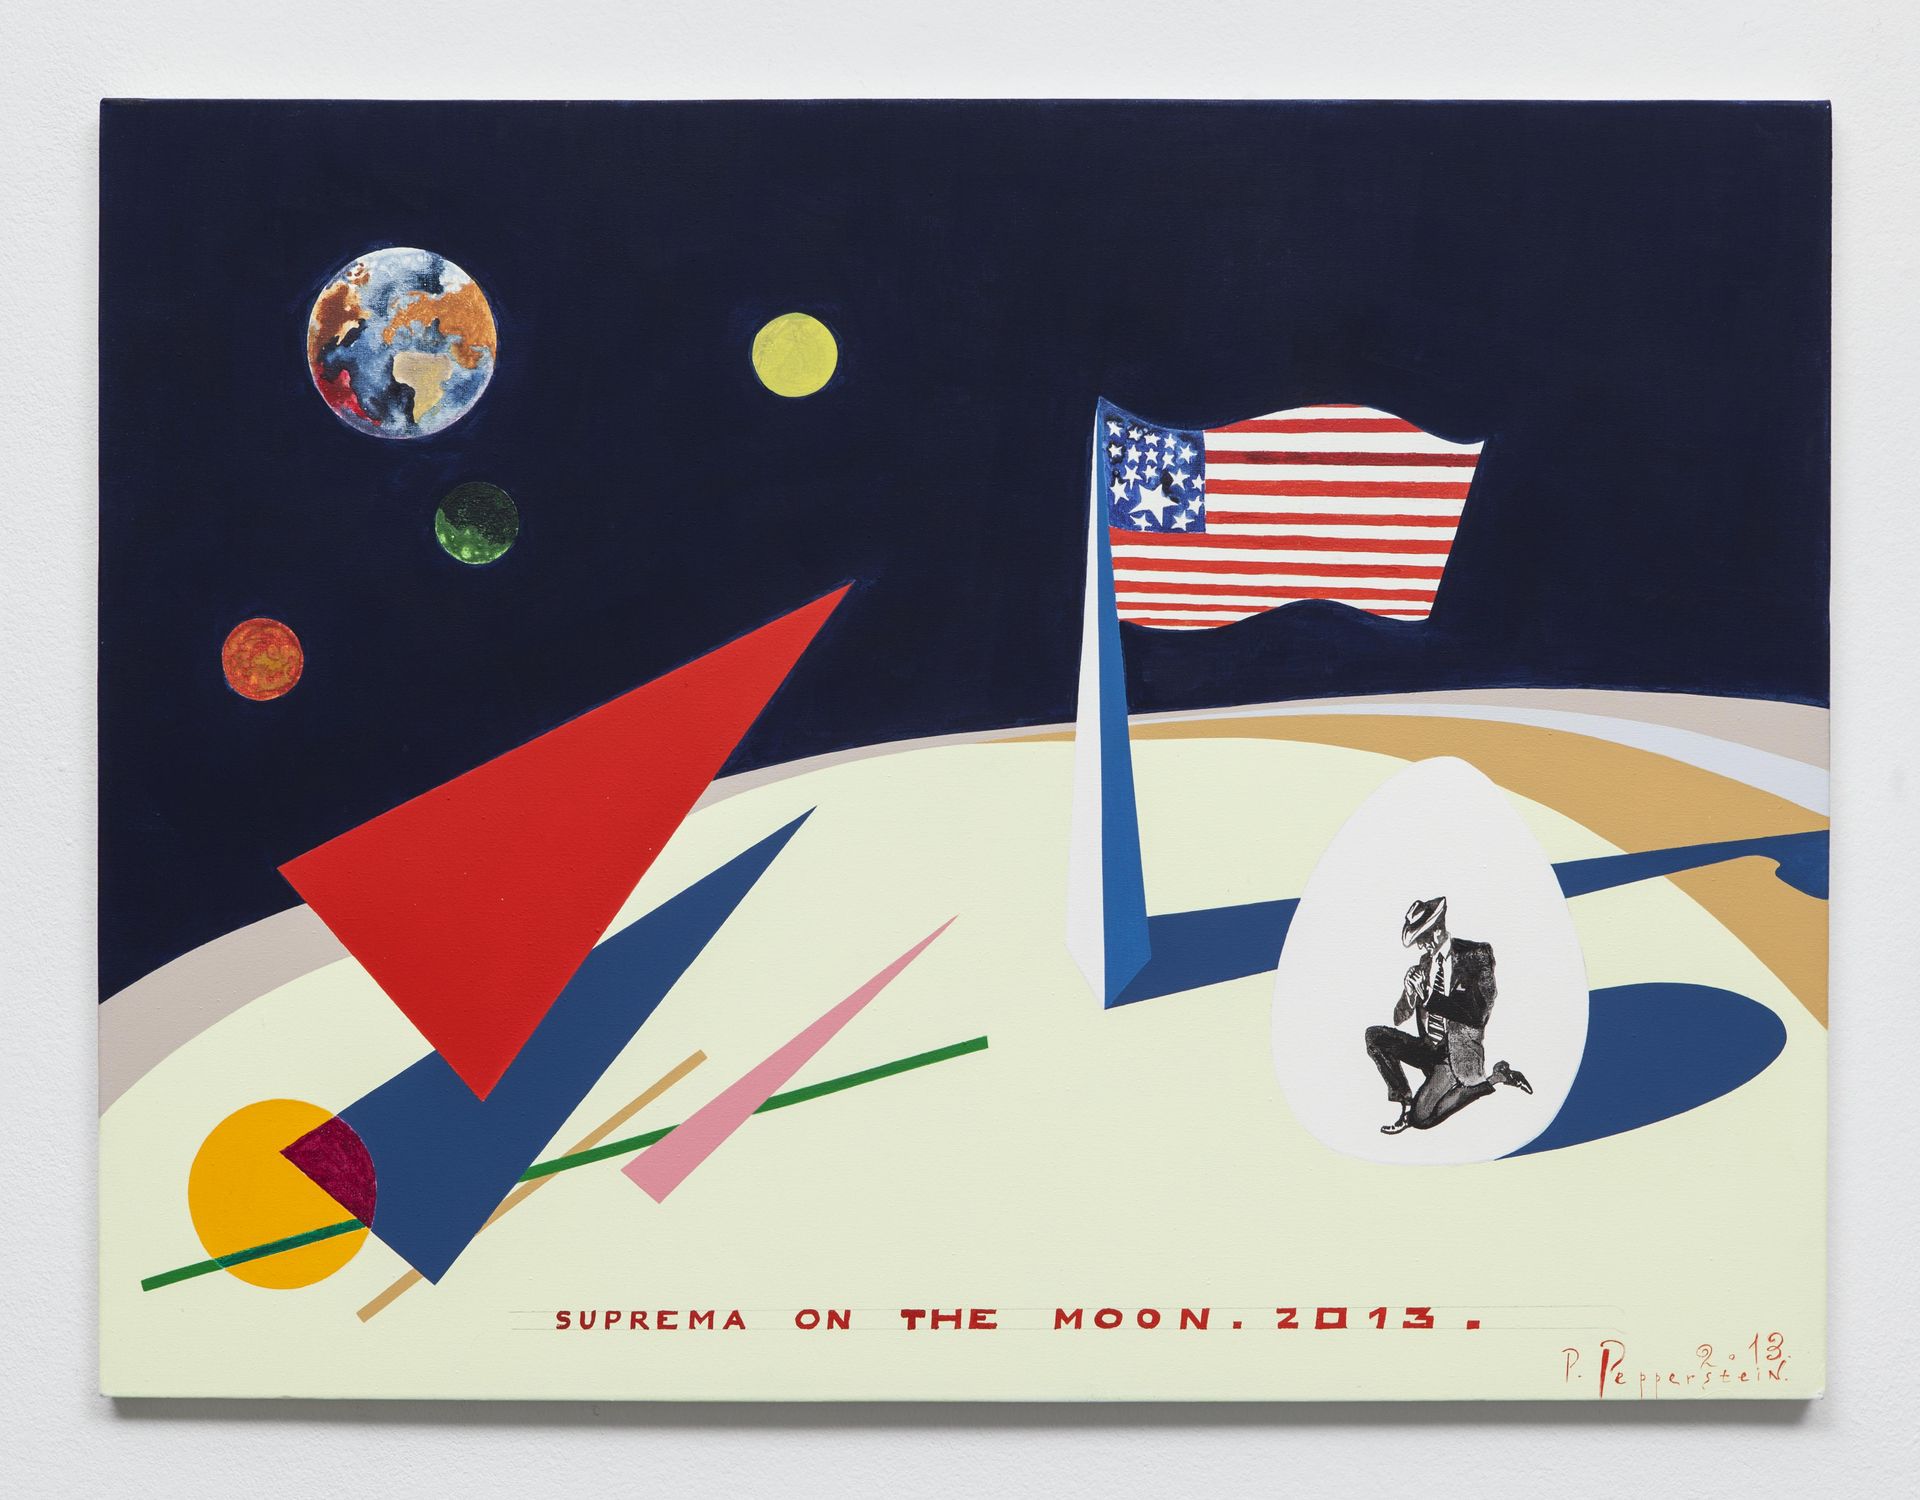 PAVEL PEPPERSTEIN, STUDIES OF AMERICAN SUPREMATISM (Suprema on the moon), 2013, the artist and private collection, Photo: Andrea Rossetti for Galerie Kamm, Berlin